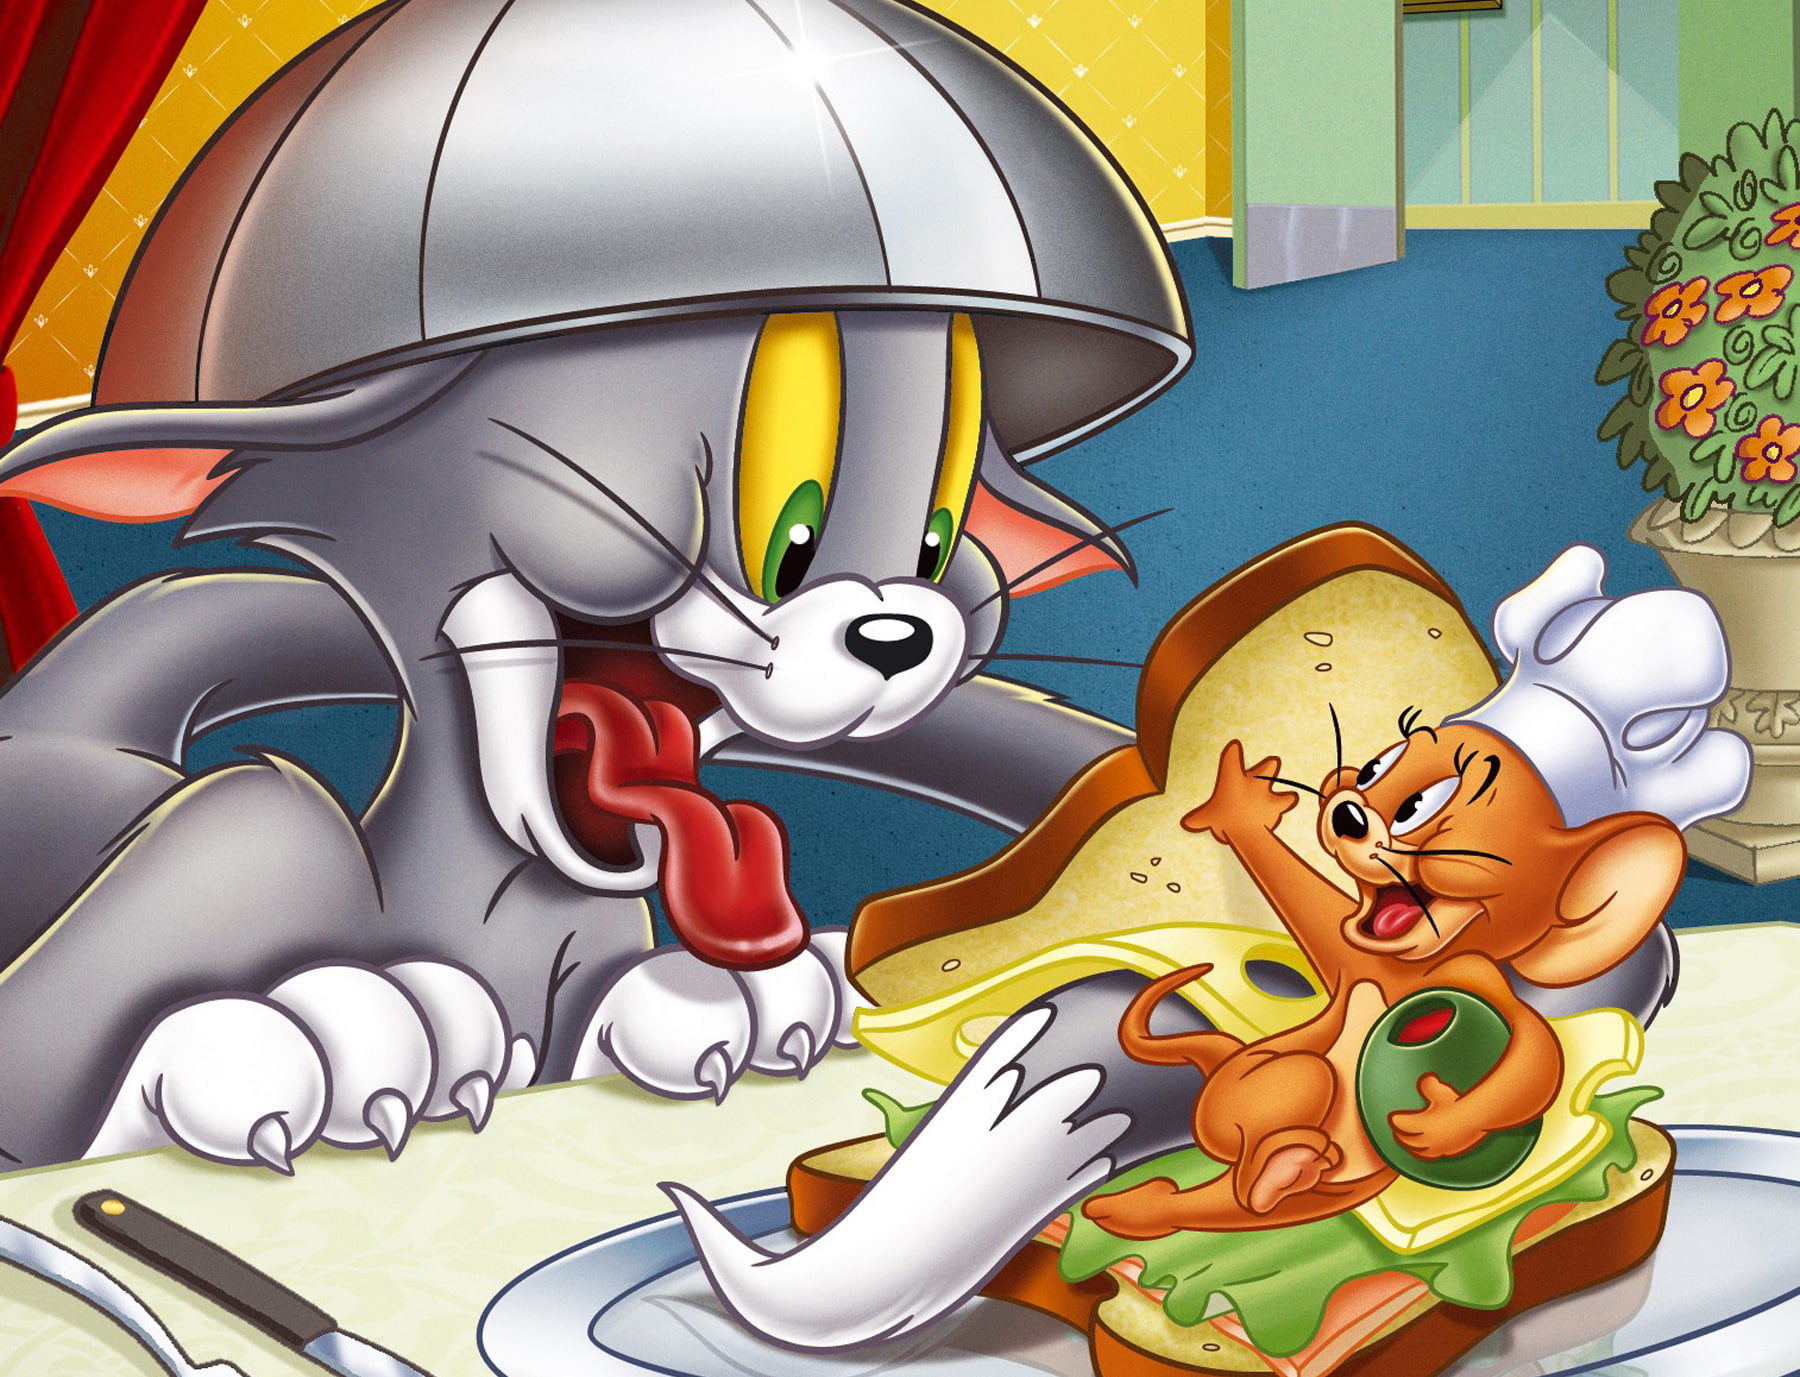 Tom And Jerry, Cartoons, Mouse, Cat, Chasing Games, Bread, House